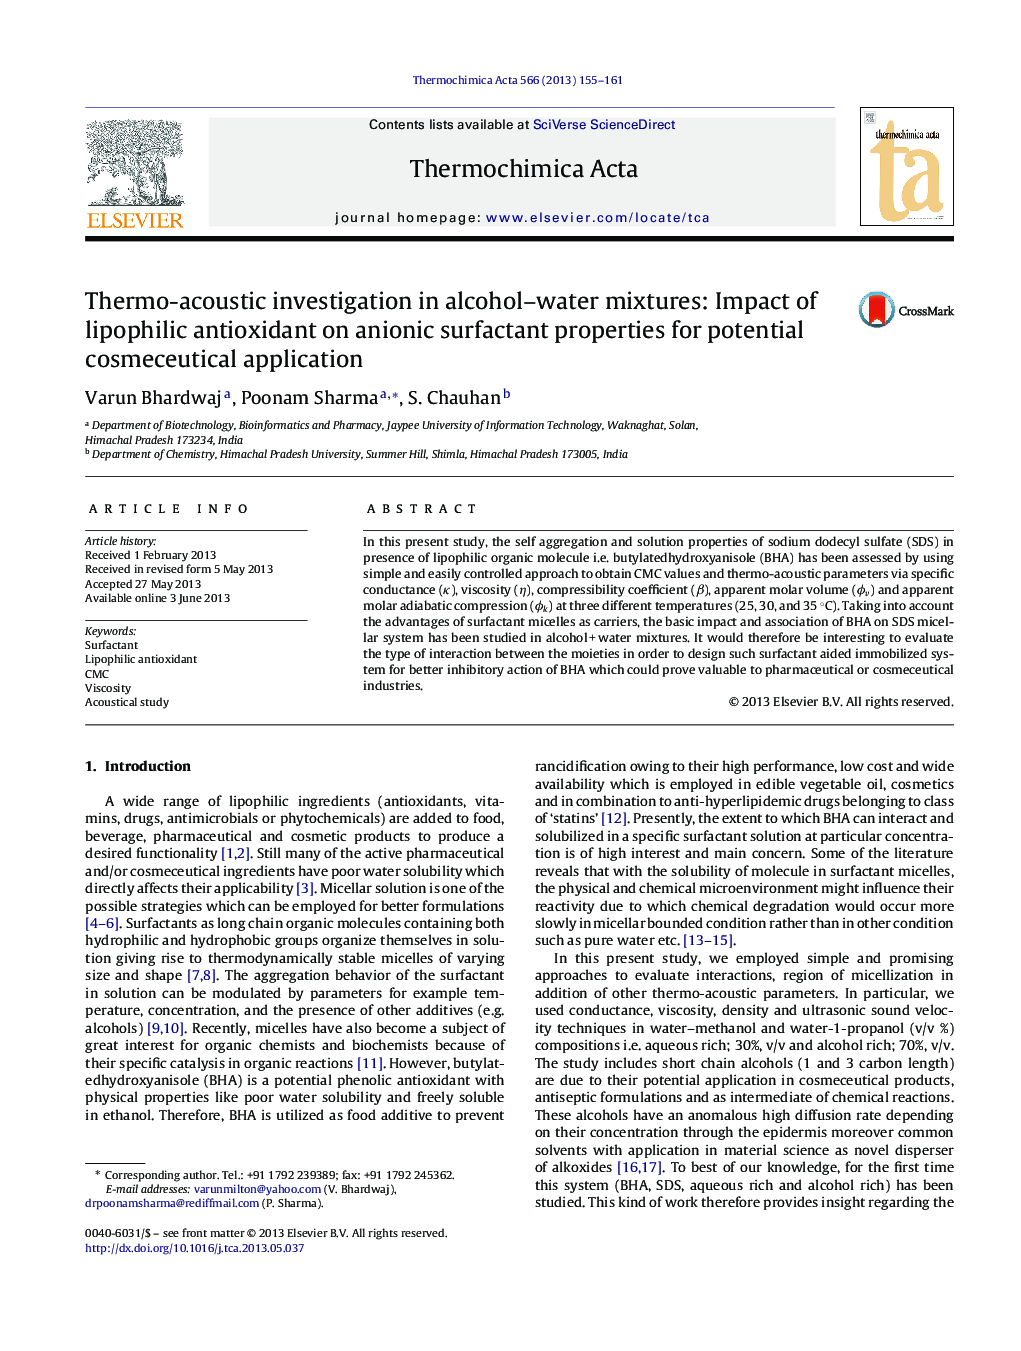 Thermo-acoustic investigation in alcohol–water mixtures: Impact of lipophilic antioxidant on anionic surfactant properties for potential cosmeceutical application